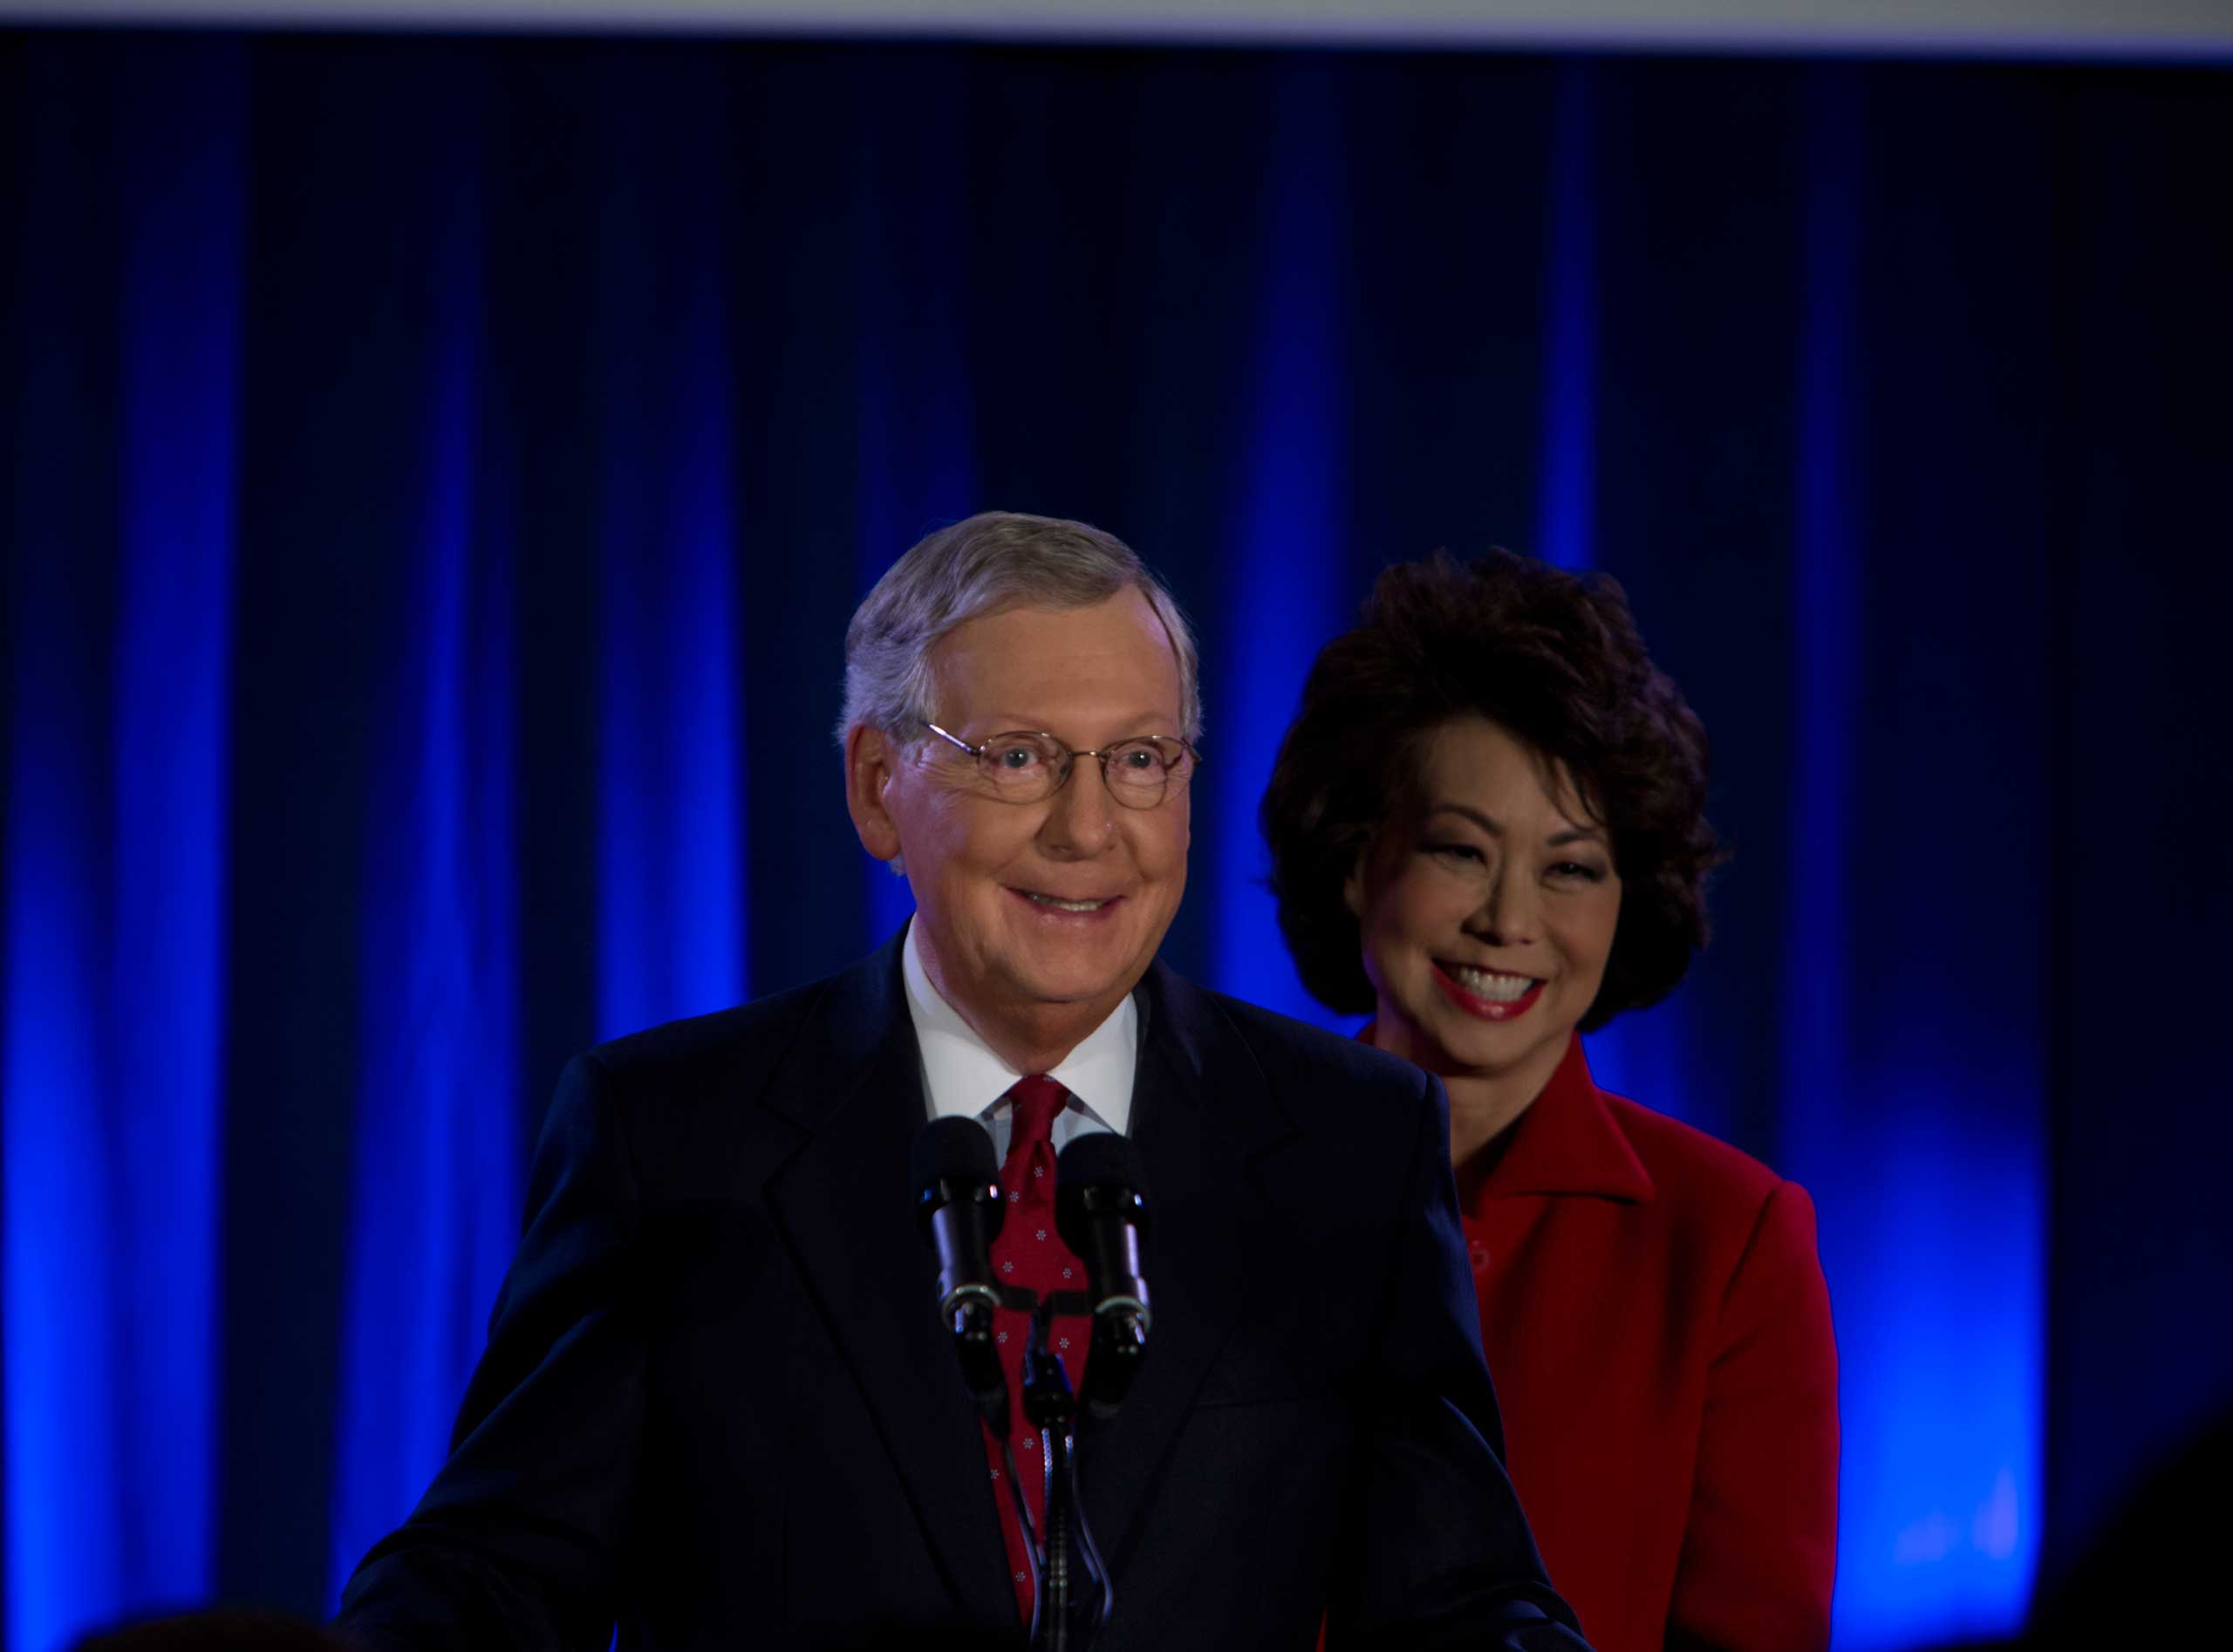 Senator Mitch McConnell with his wife Elaine Chao on election night, Nov. 4, 2014. (Christopher Morris—VII for TIME)